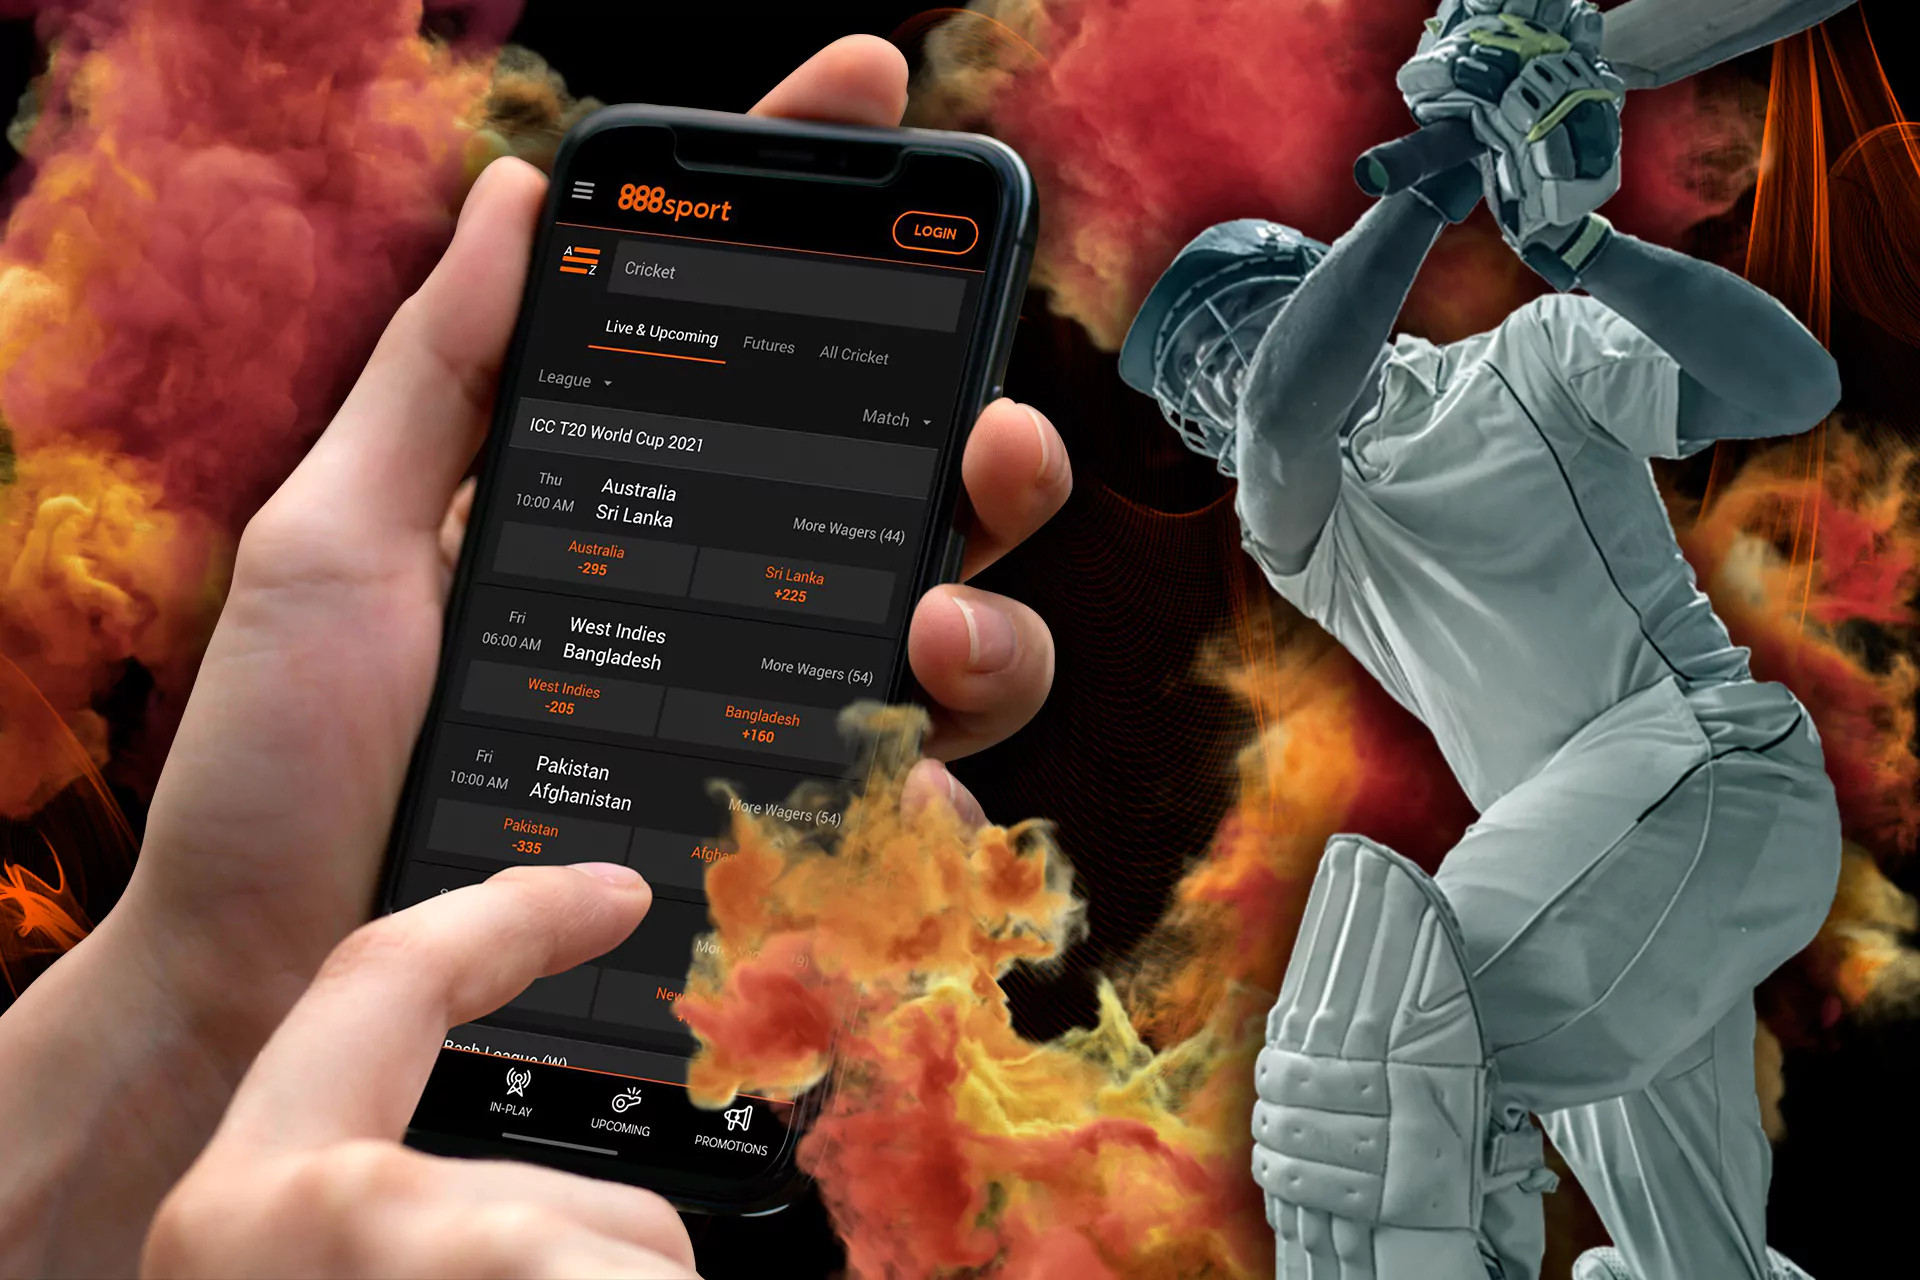 There are some easy steps to start betting on cricket at 888sport.